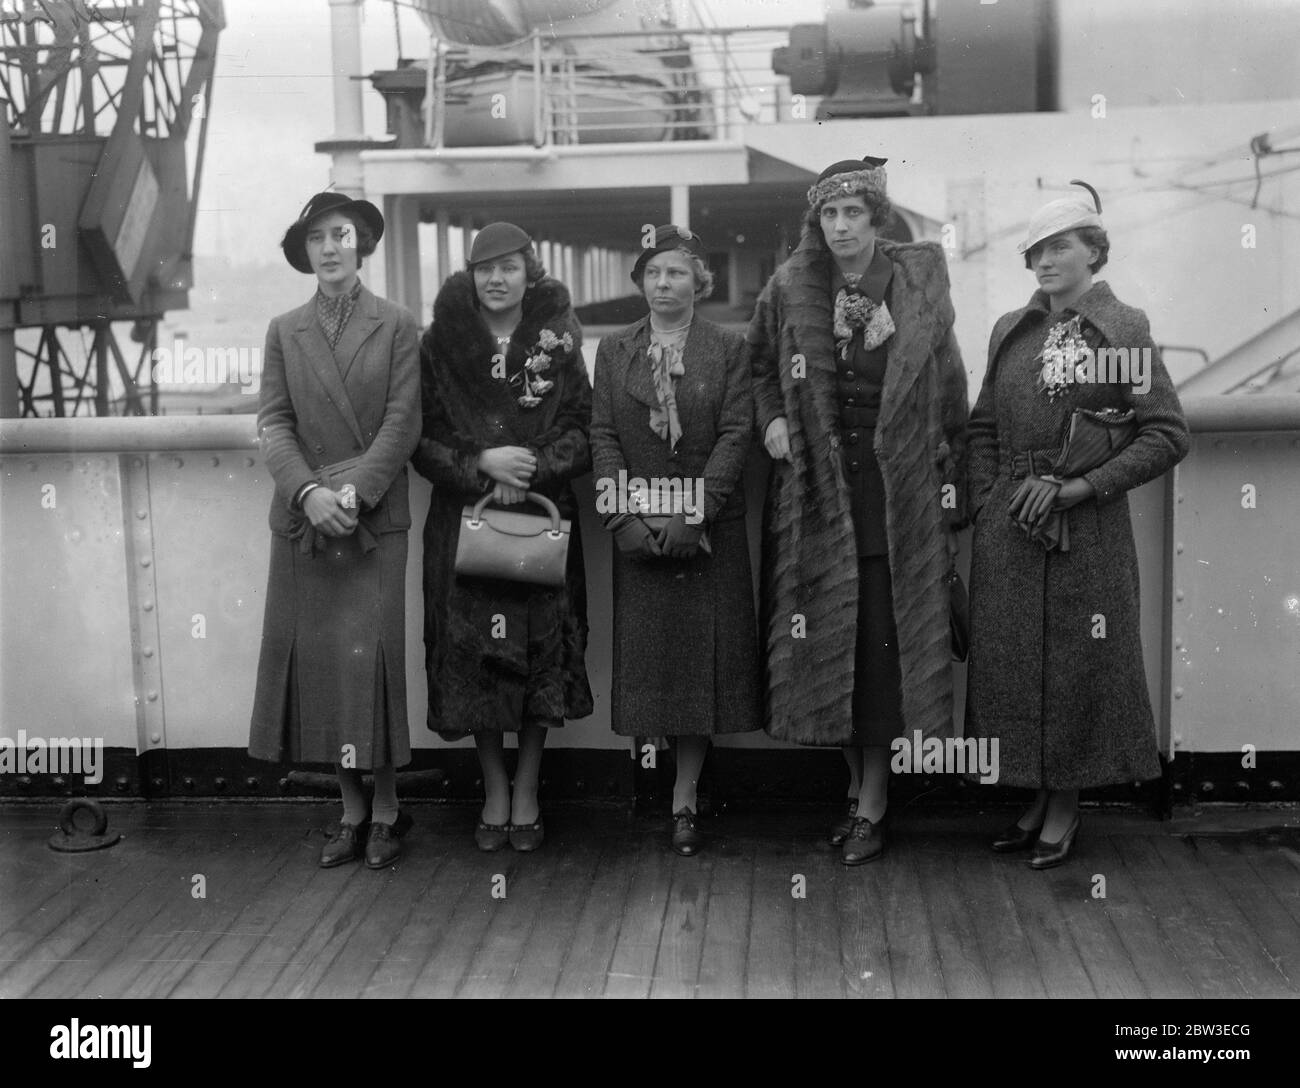 Women squash players leave London to compete in American squash championship . Photo shows , the Hon Anne Lytton Milbanks ( captain ) , Miss Margaret Lamb , Mrs Ian Mackechnie , Miss Nora Kelman , Miss Betty Cooke and Miss Rachel Sykes are in the team . 24 January 1935 Stock Photo